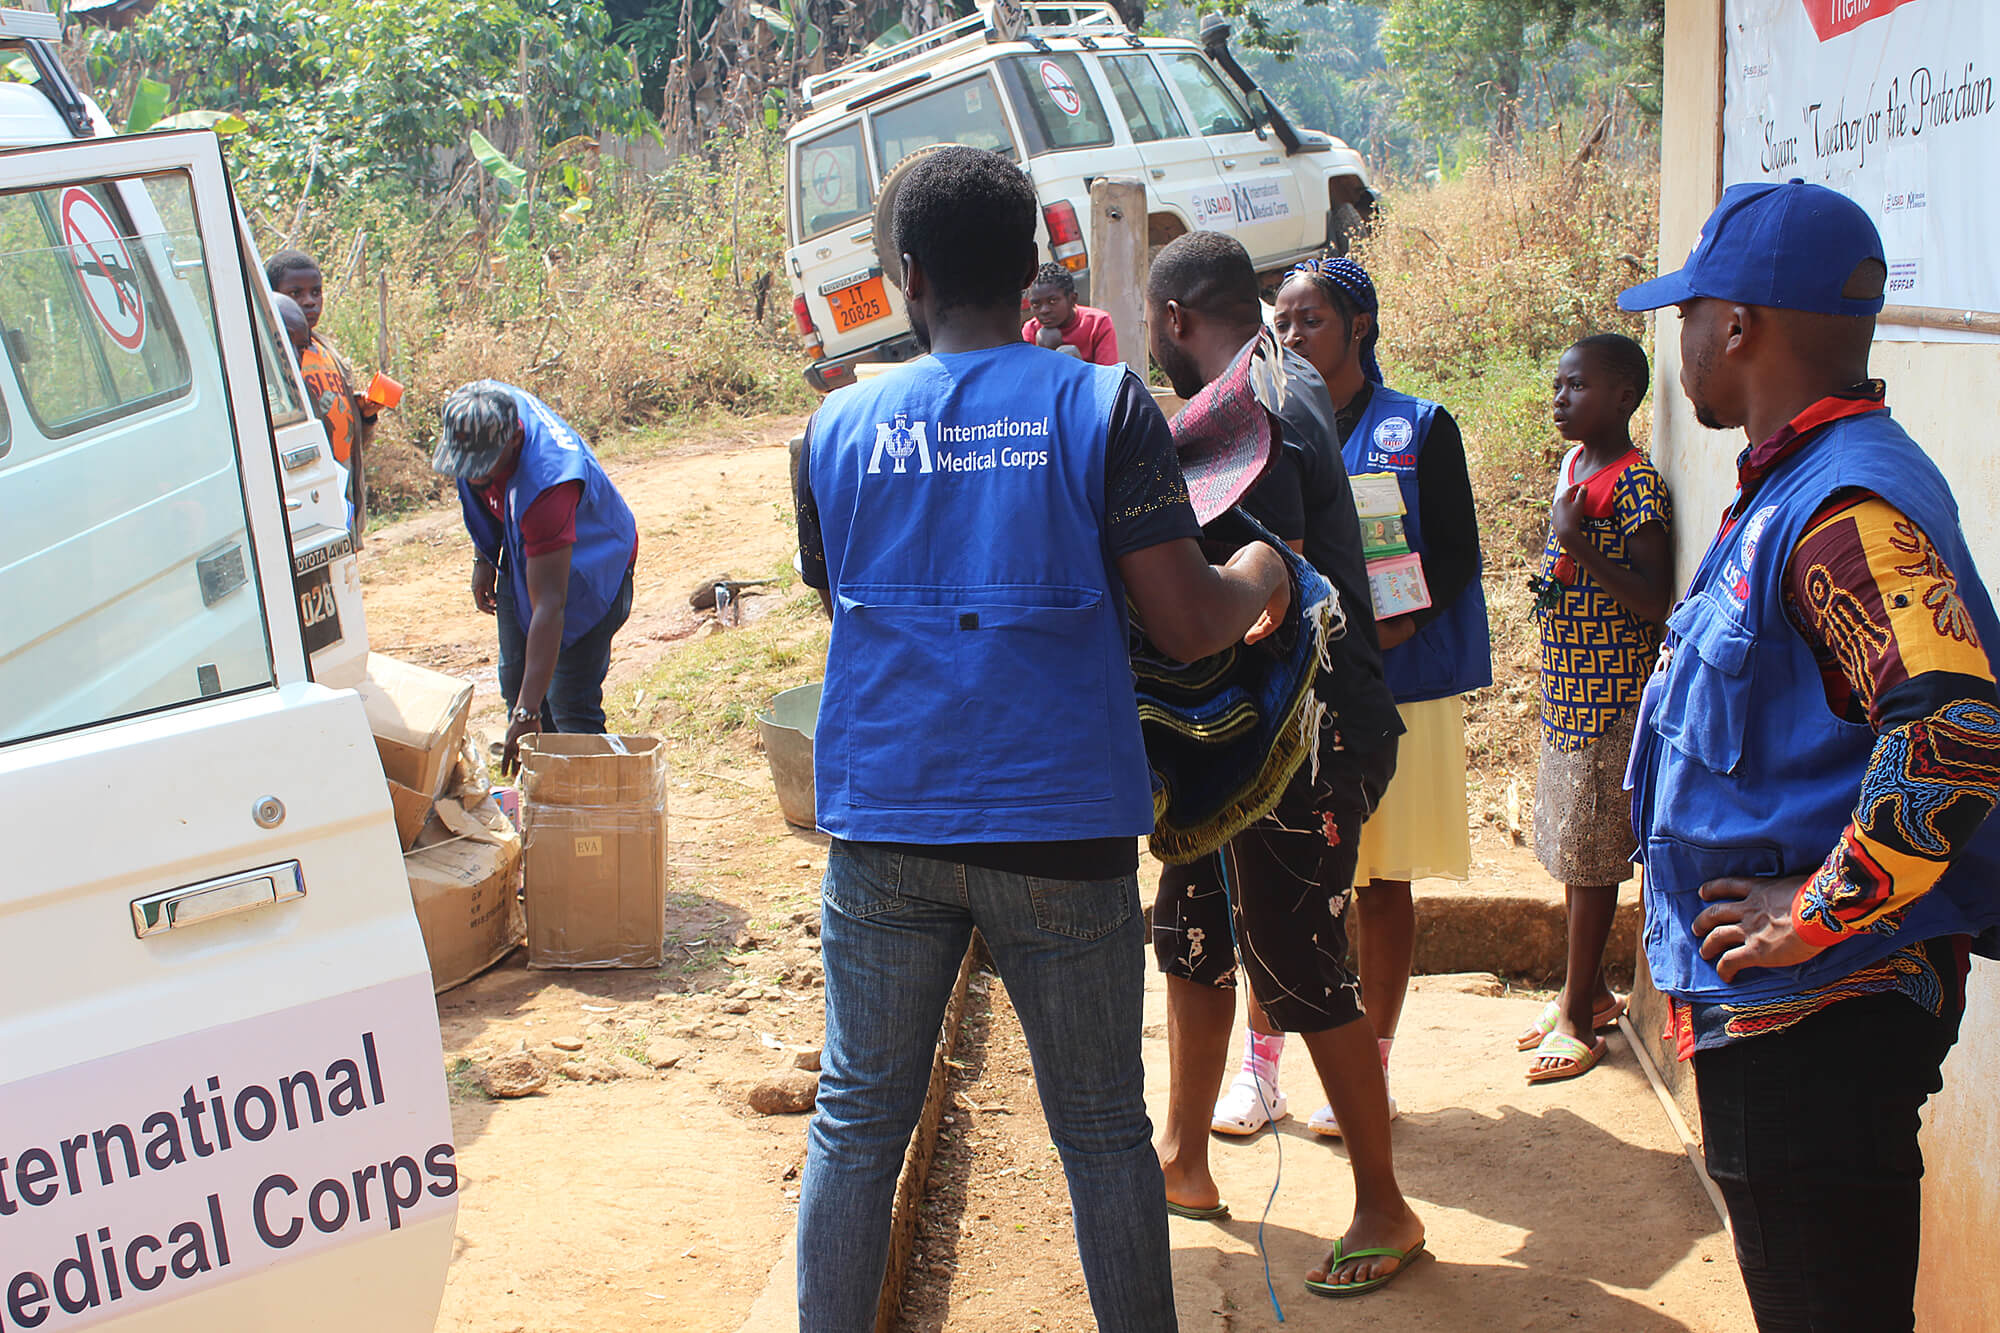 The field team arrives at Konda Integrated Health Center (IHC) and provides materials for mental health support groups in the northwest region of Cameroon.